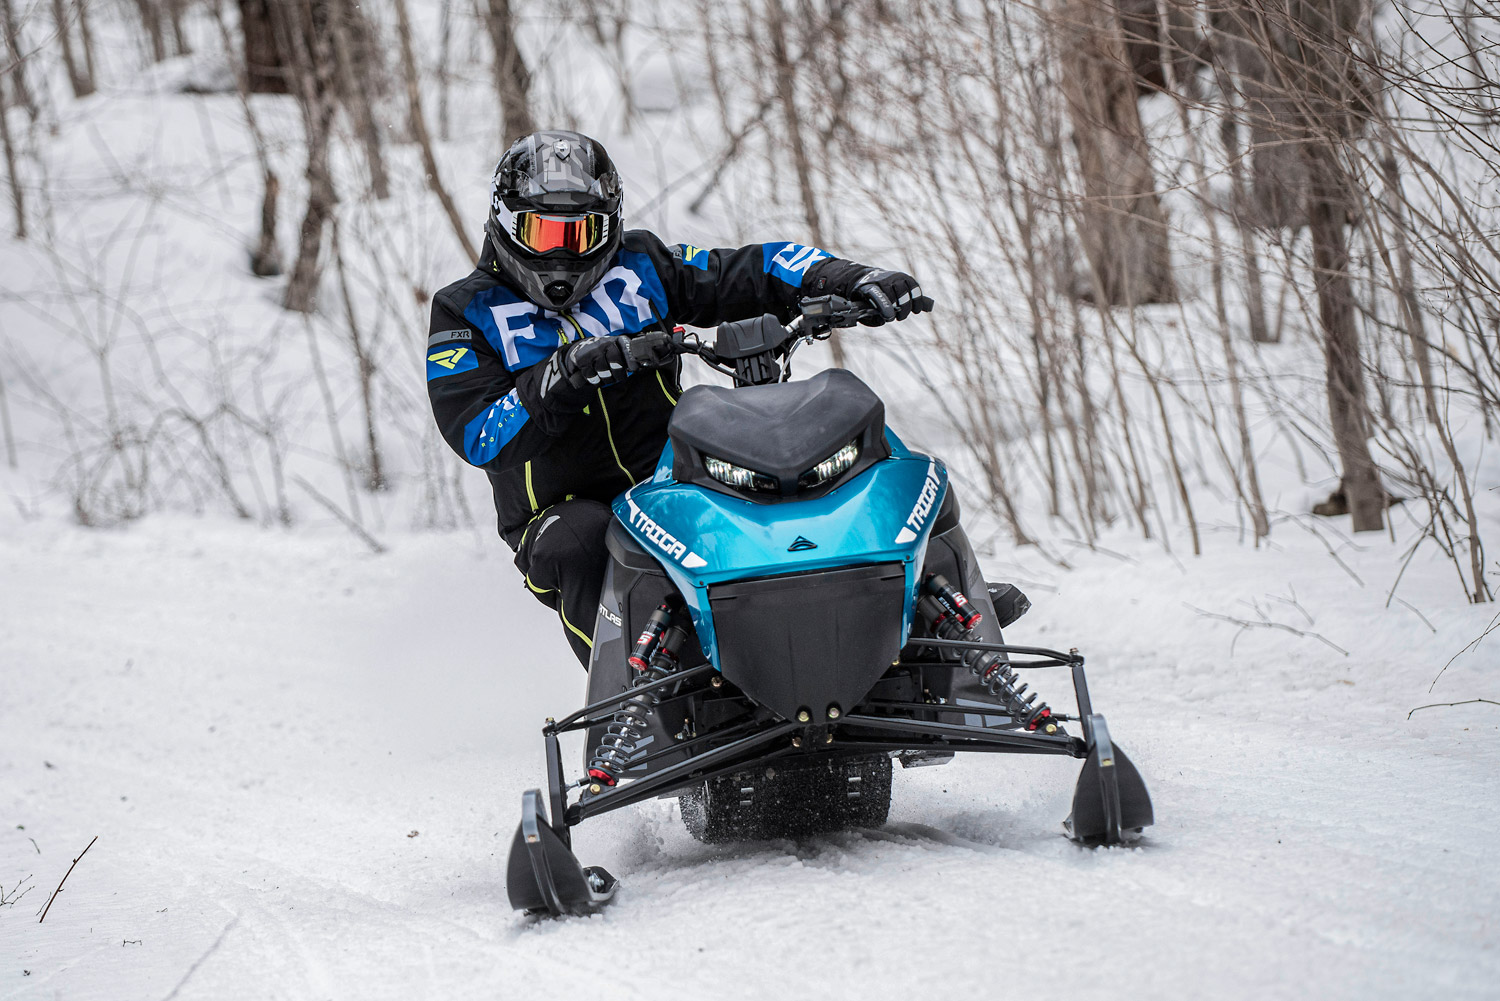 WILL ELECTRIC SLEDS BECOME THE NORM?